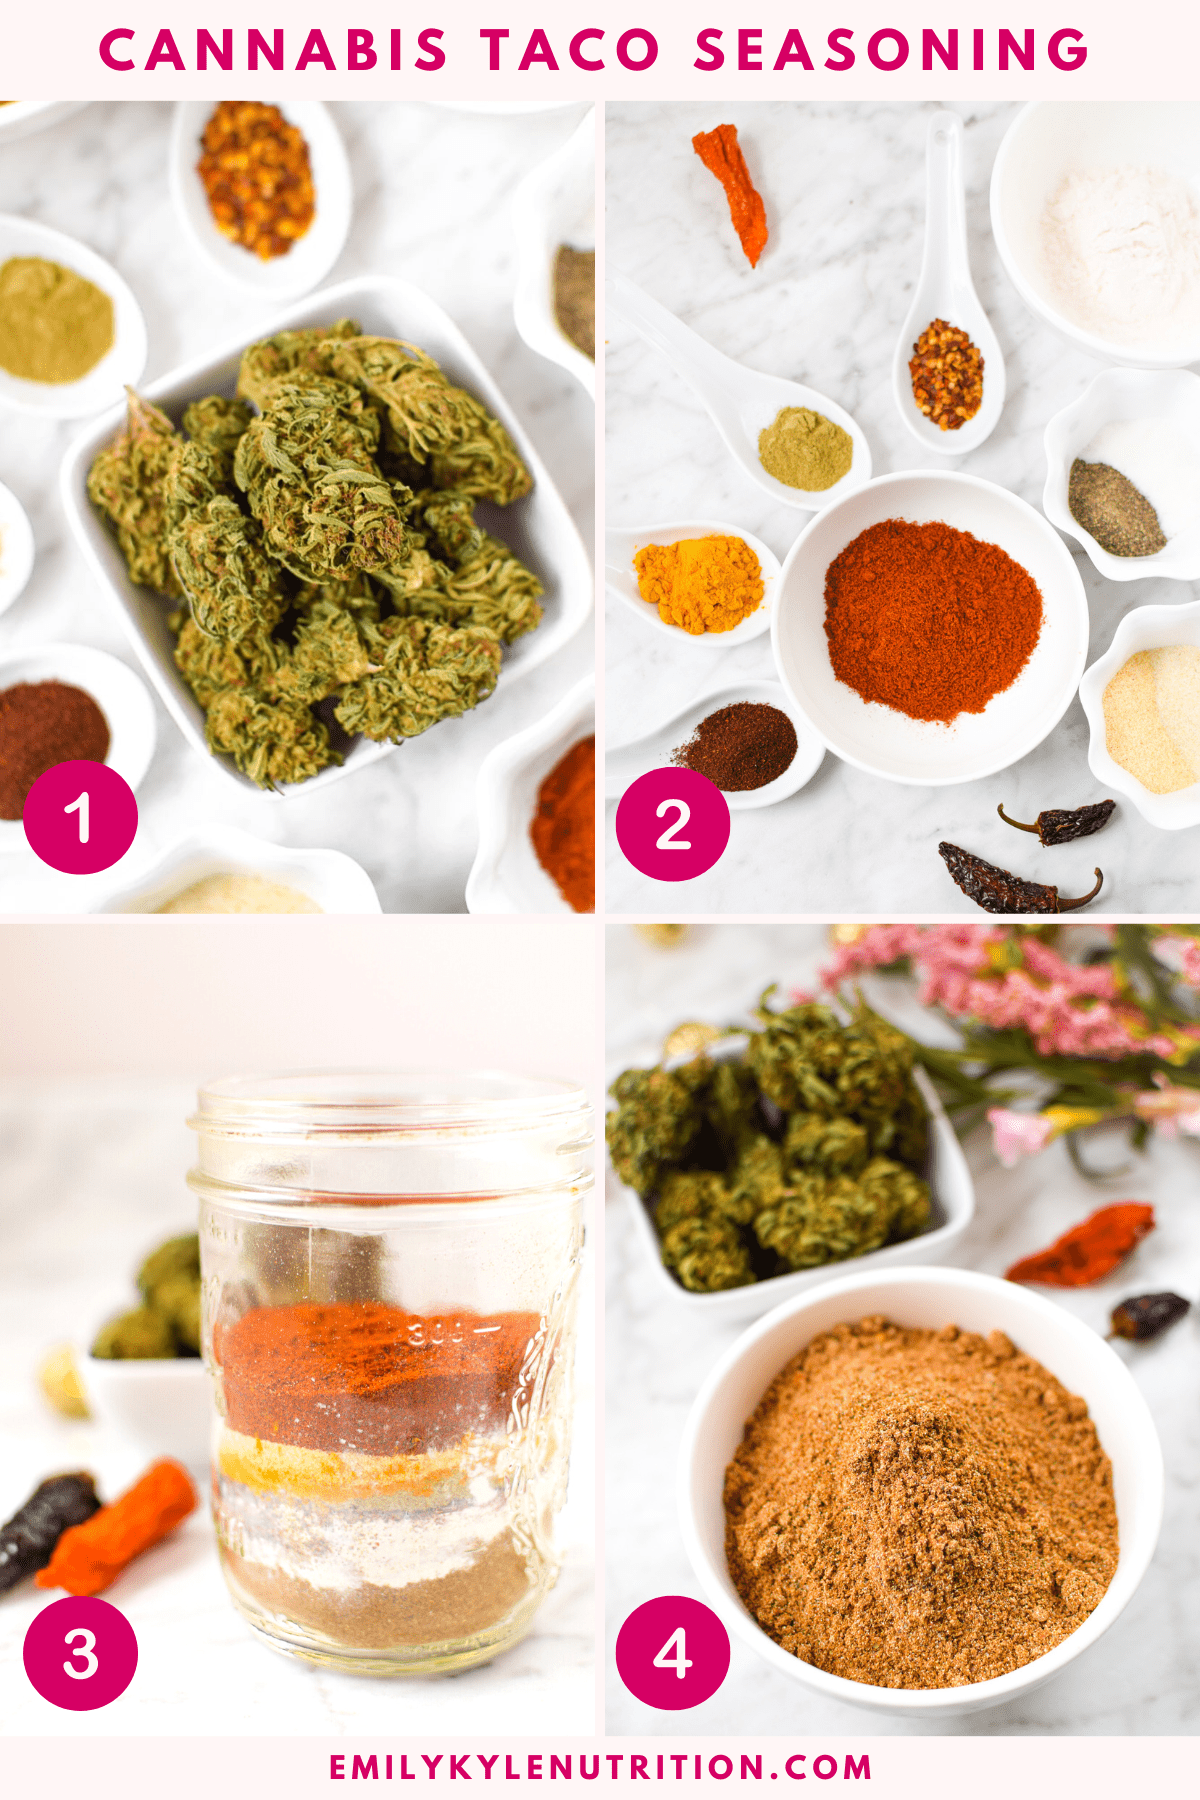 A four step image collage showing the steps needed to make cannabis taco seasoning. 